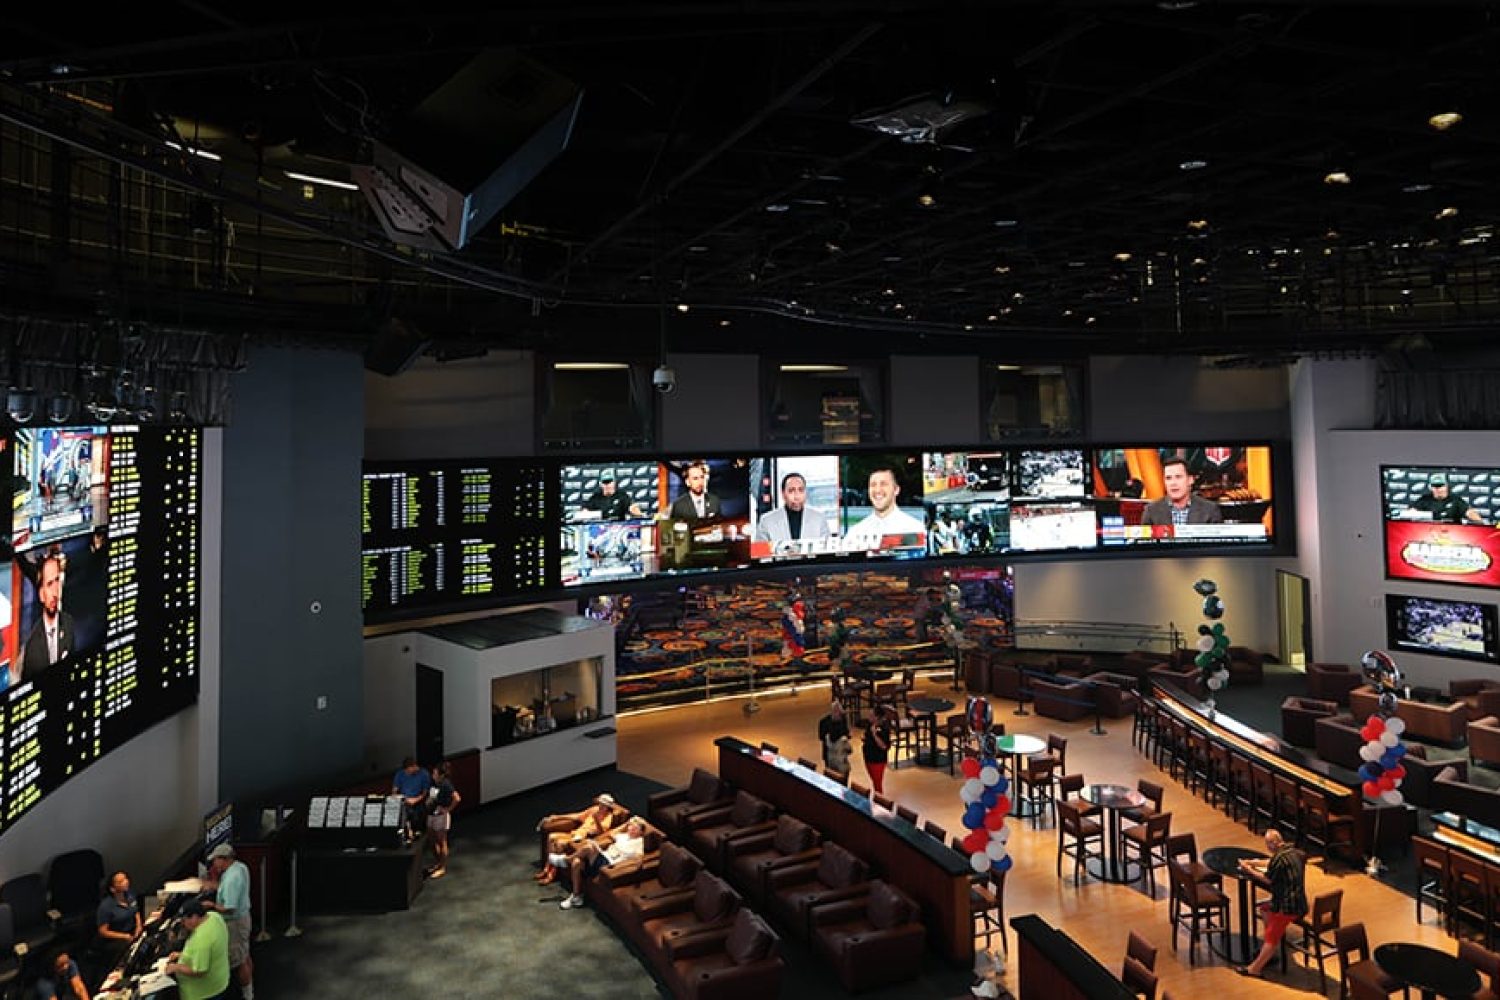 Overhead view of the Ocean City Casino sportsbook in Atlantic City including the bar and multiple video walls.